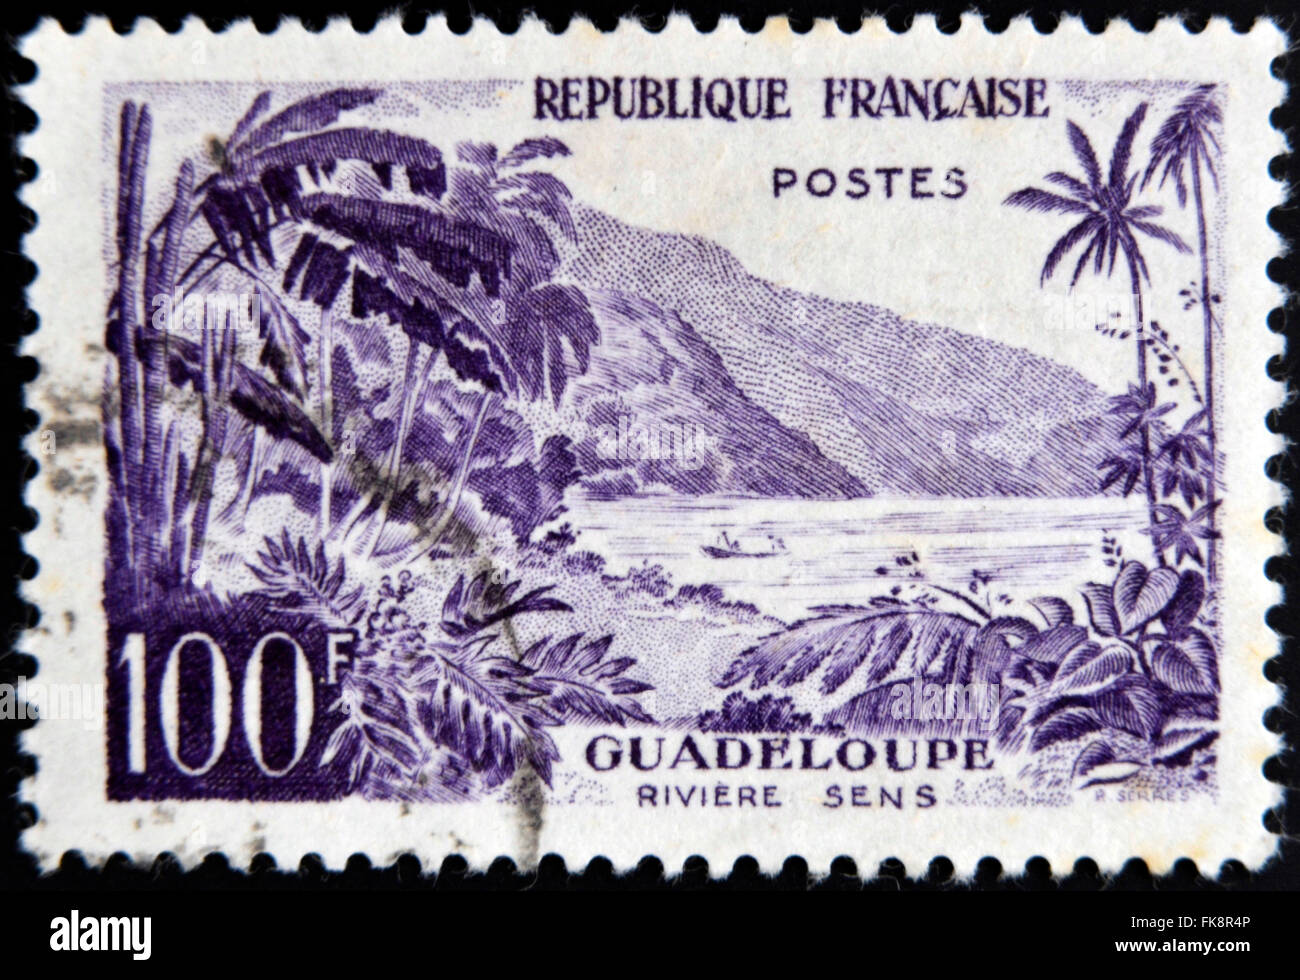 FRANCE - CIRCA 1957: stamp printed in France shows Guadeloupe, Sens river, circa 1957 Stock Photo